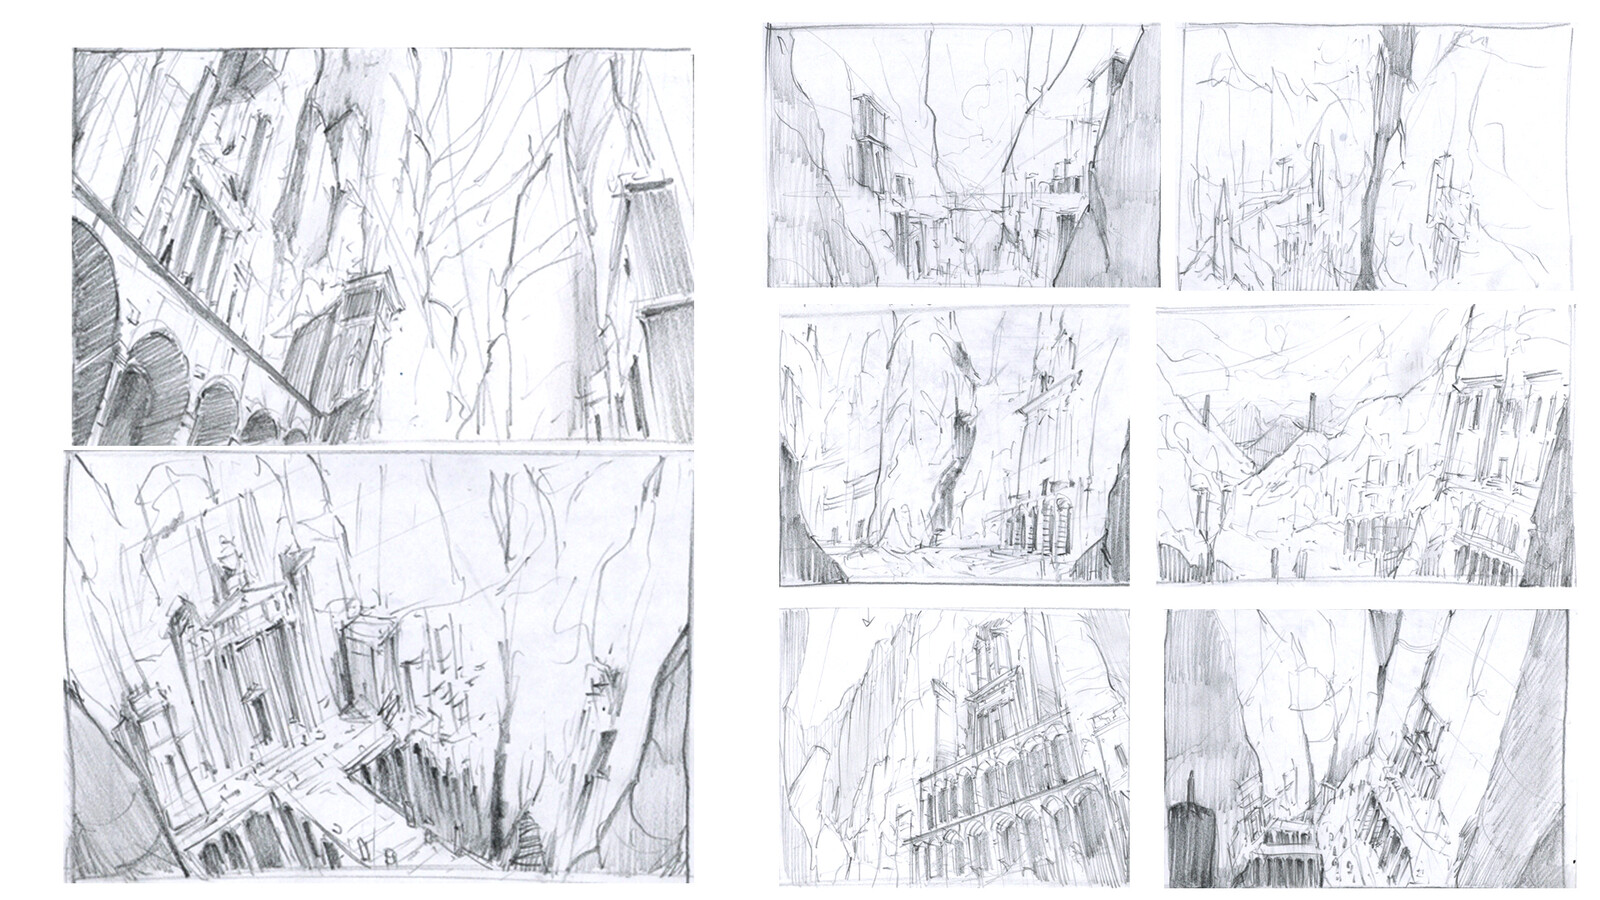 Some of my initial thumbnails focusing mainly on composition.